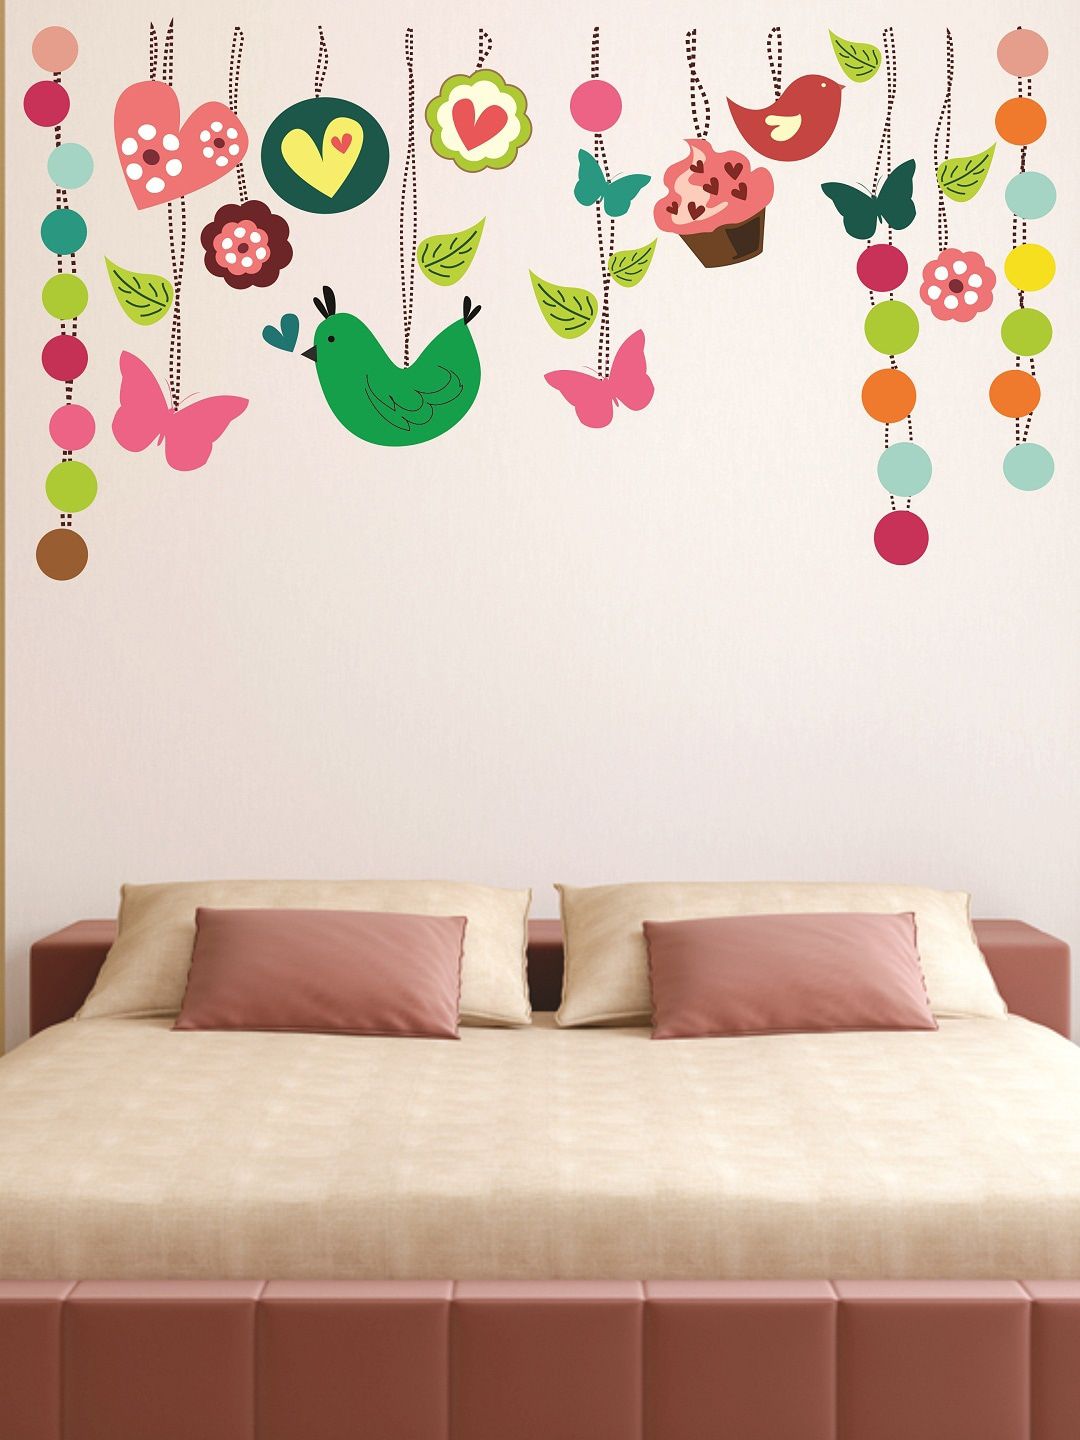 WALLSTICK Multicoloured Abstract Large Vinyl Wall Sticker Price in India